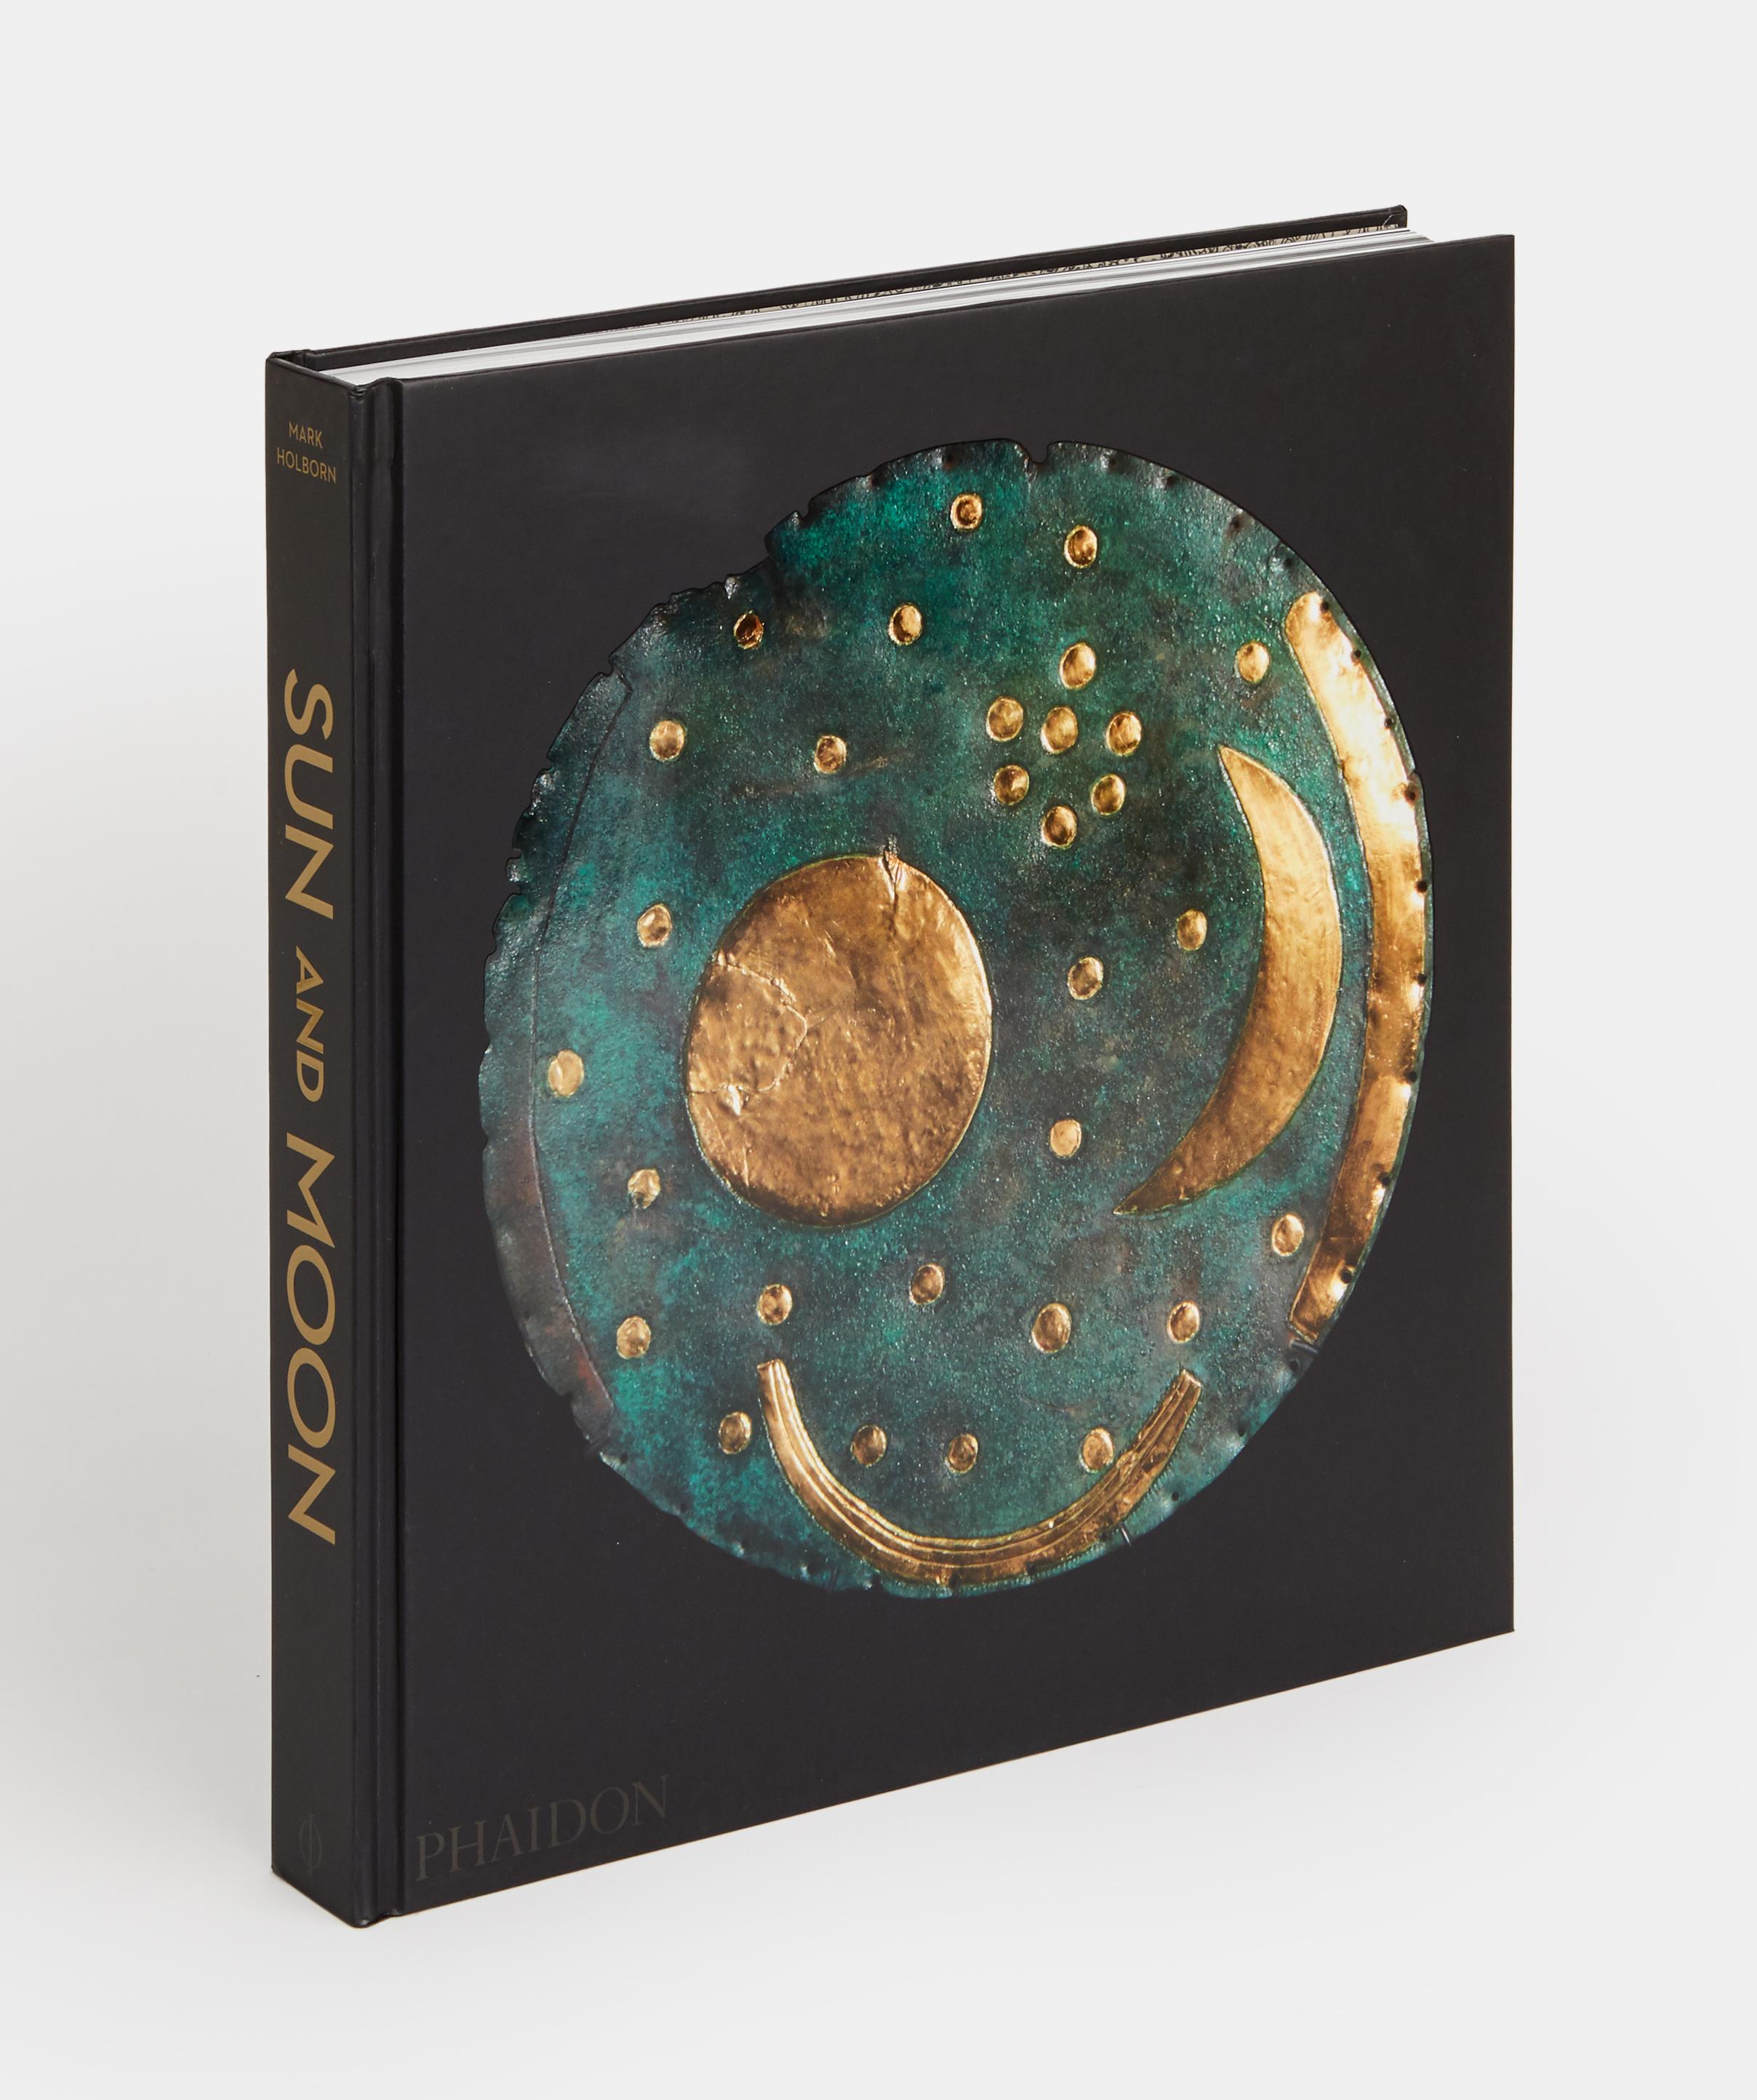 A unique pictorial history of astronomical exploration from the earliest Prehistoric observatories to the latest satellite images with 280 spectacular images and an inspiring story imparting the excitement of discovery, Sun and Moon marks the